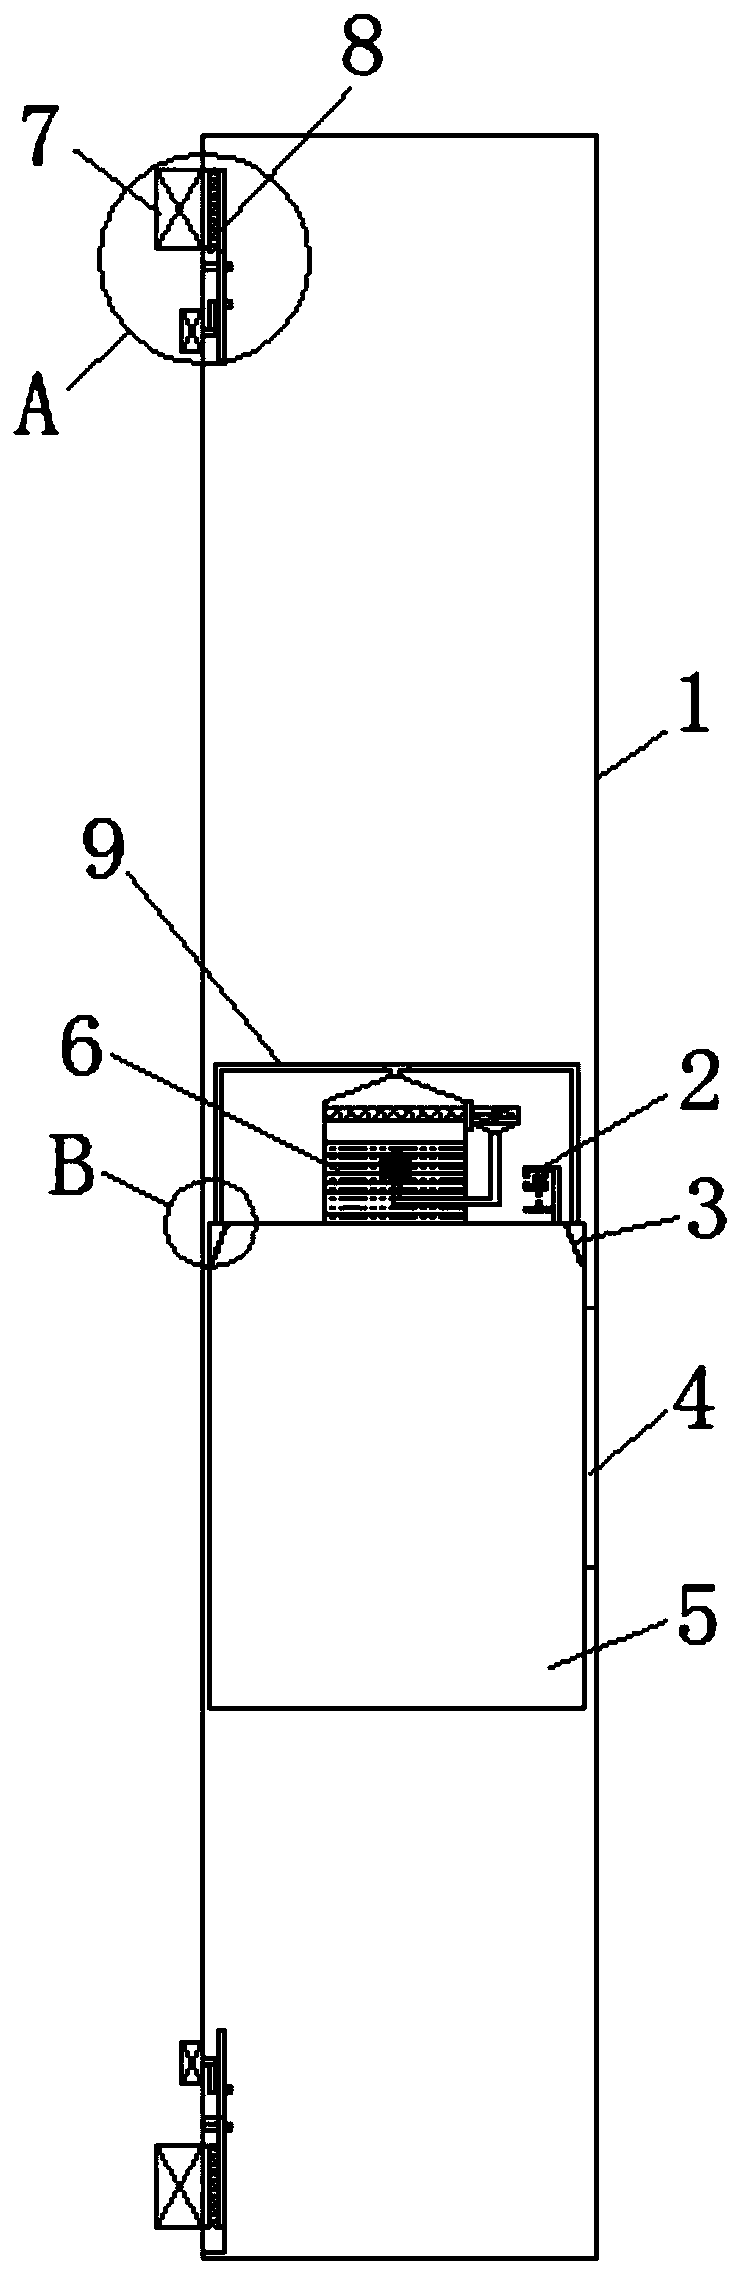 Power ventilating system used for elevator